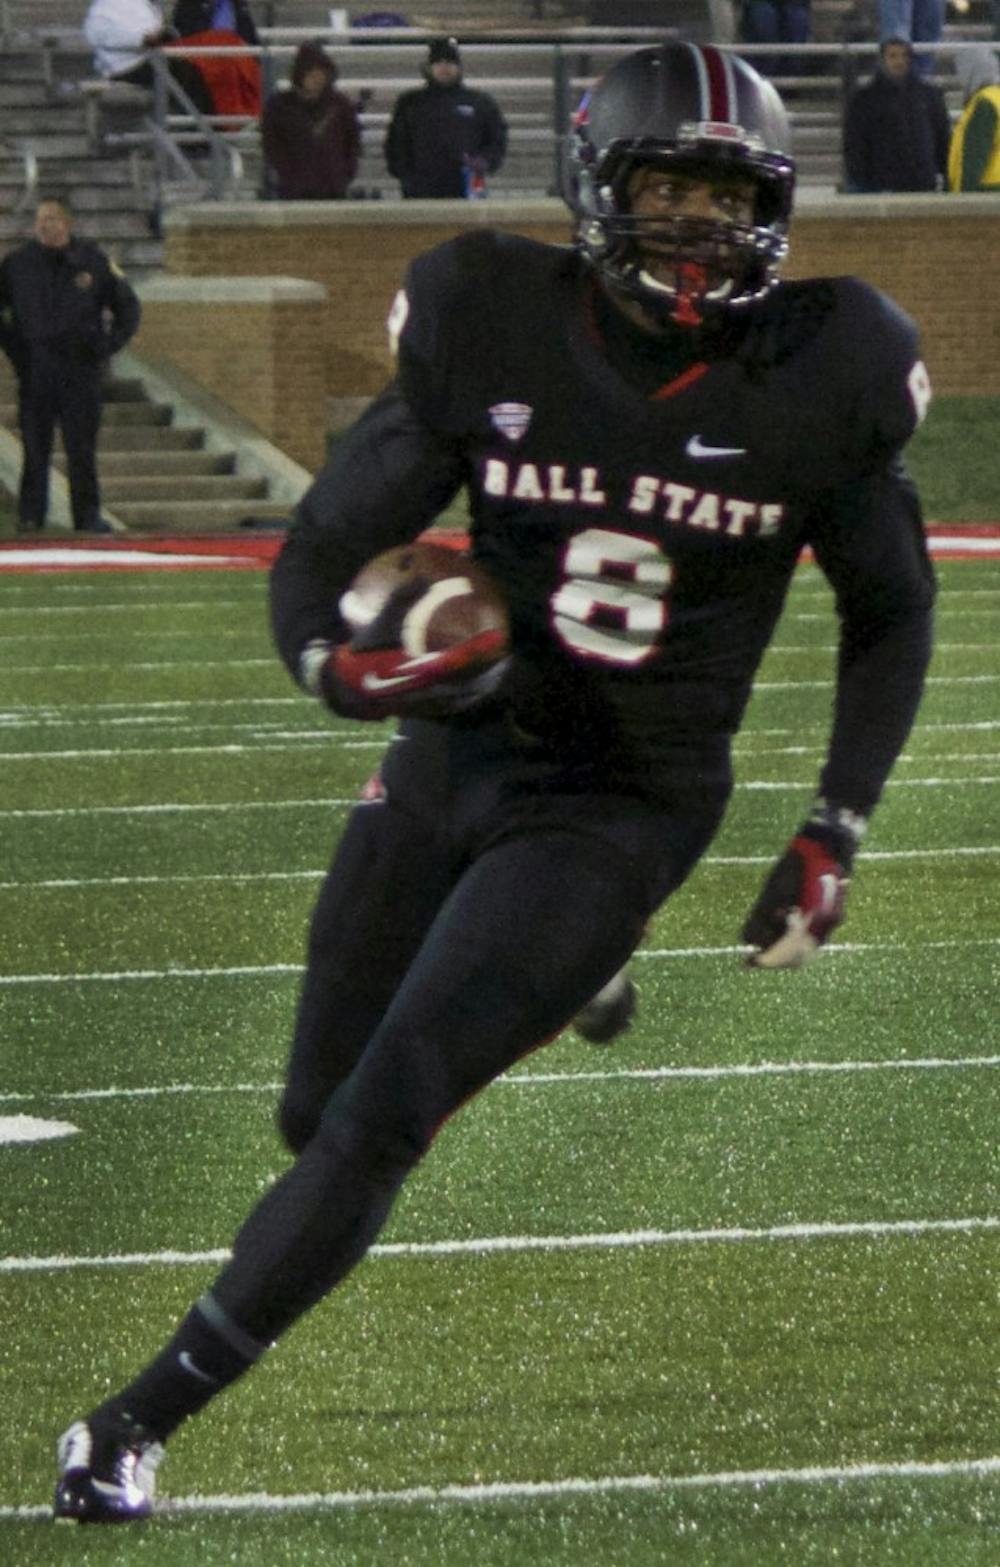 Ball State’s senior wide receiver Jordan Williams attempts to gain a few yards during the game against Bowling Green on Nov. 24 in Scheumann Stadium. DN PHOTO GRACE RAMEY